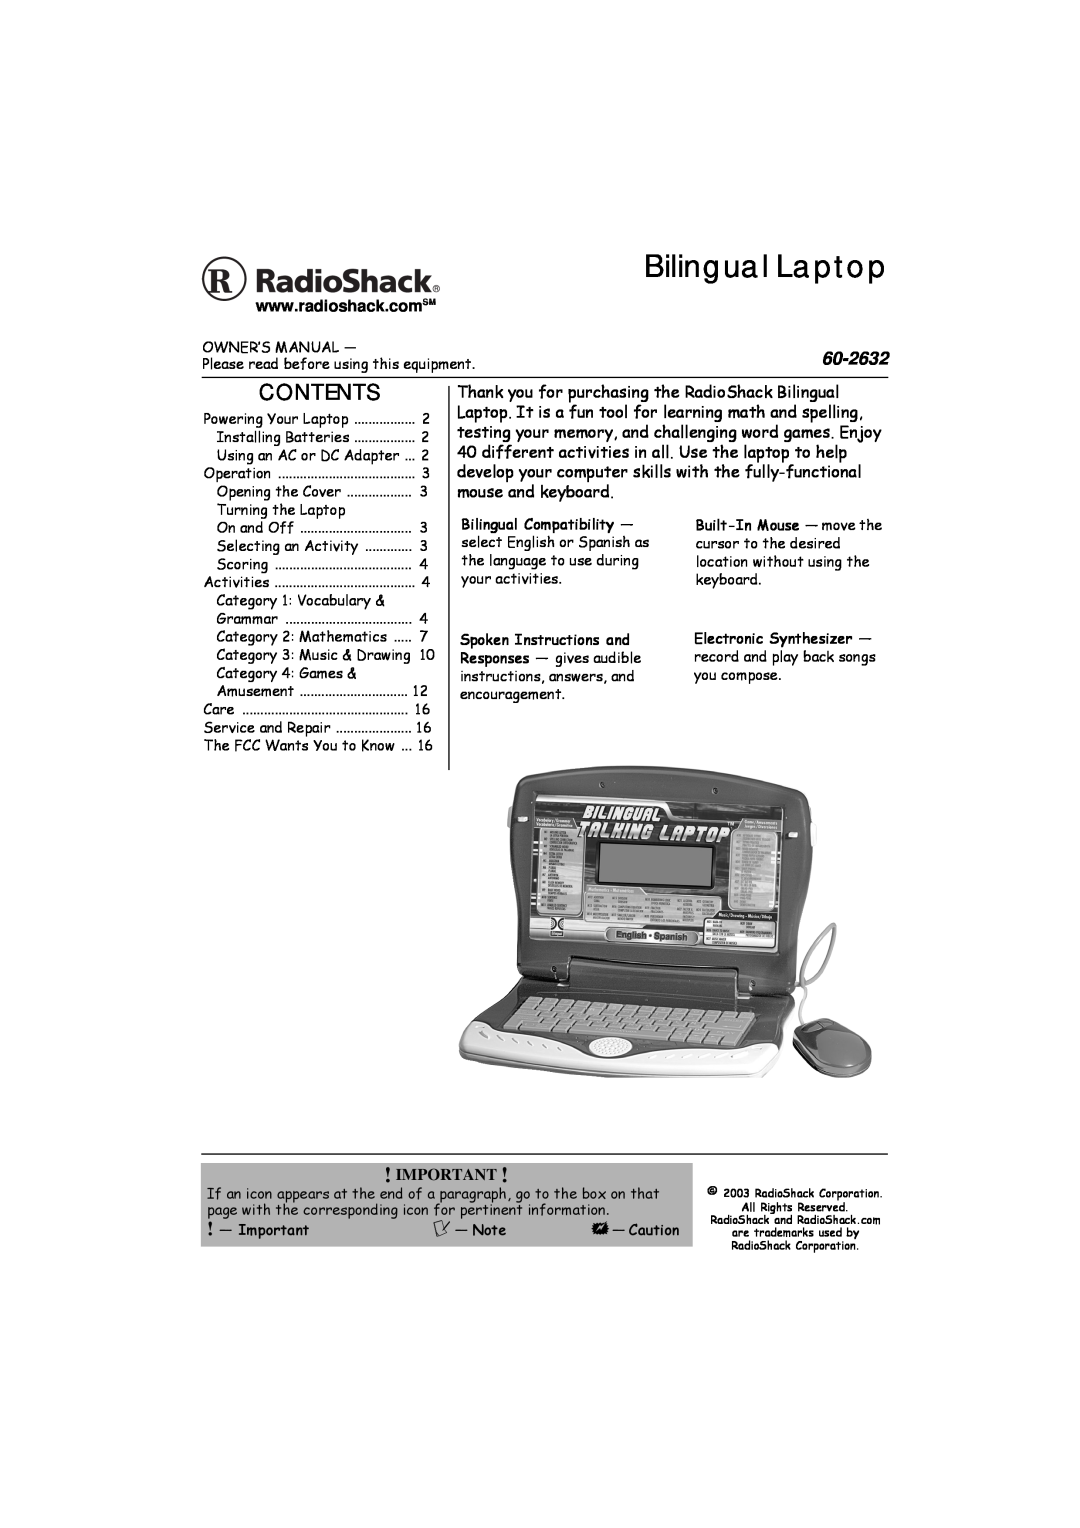 Radio Shack 60-2632 owner manual Bilingual Laptop, Contents, Owner’S Manual, Please read before using this equipment 